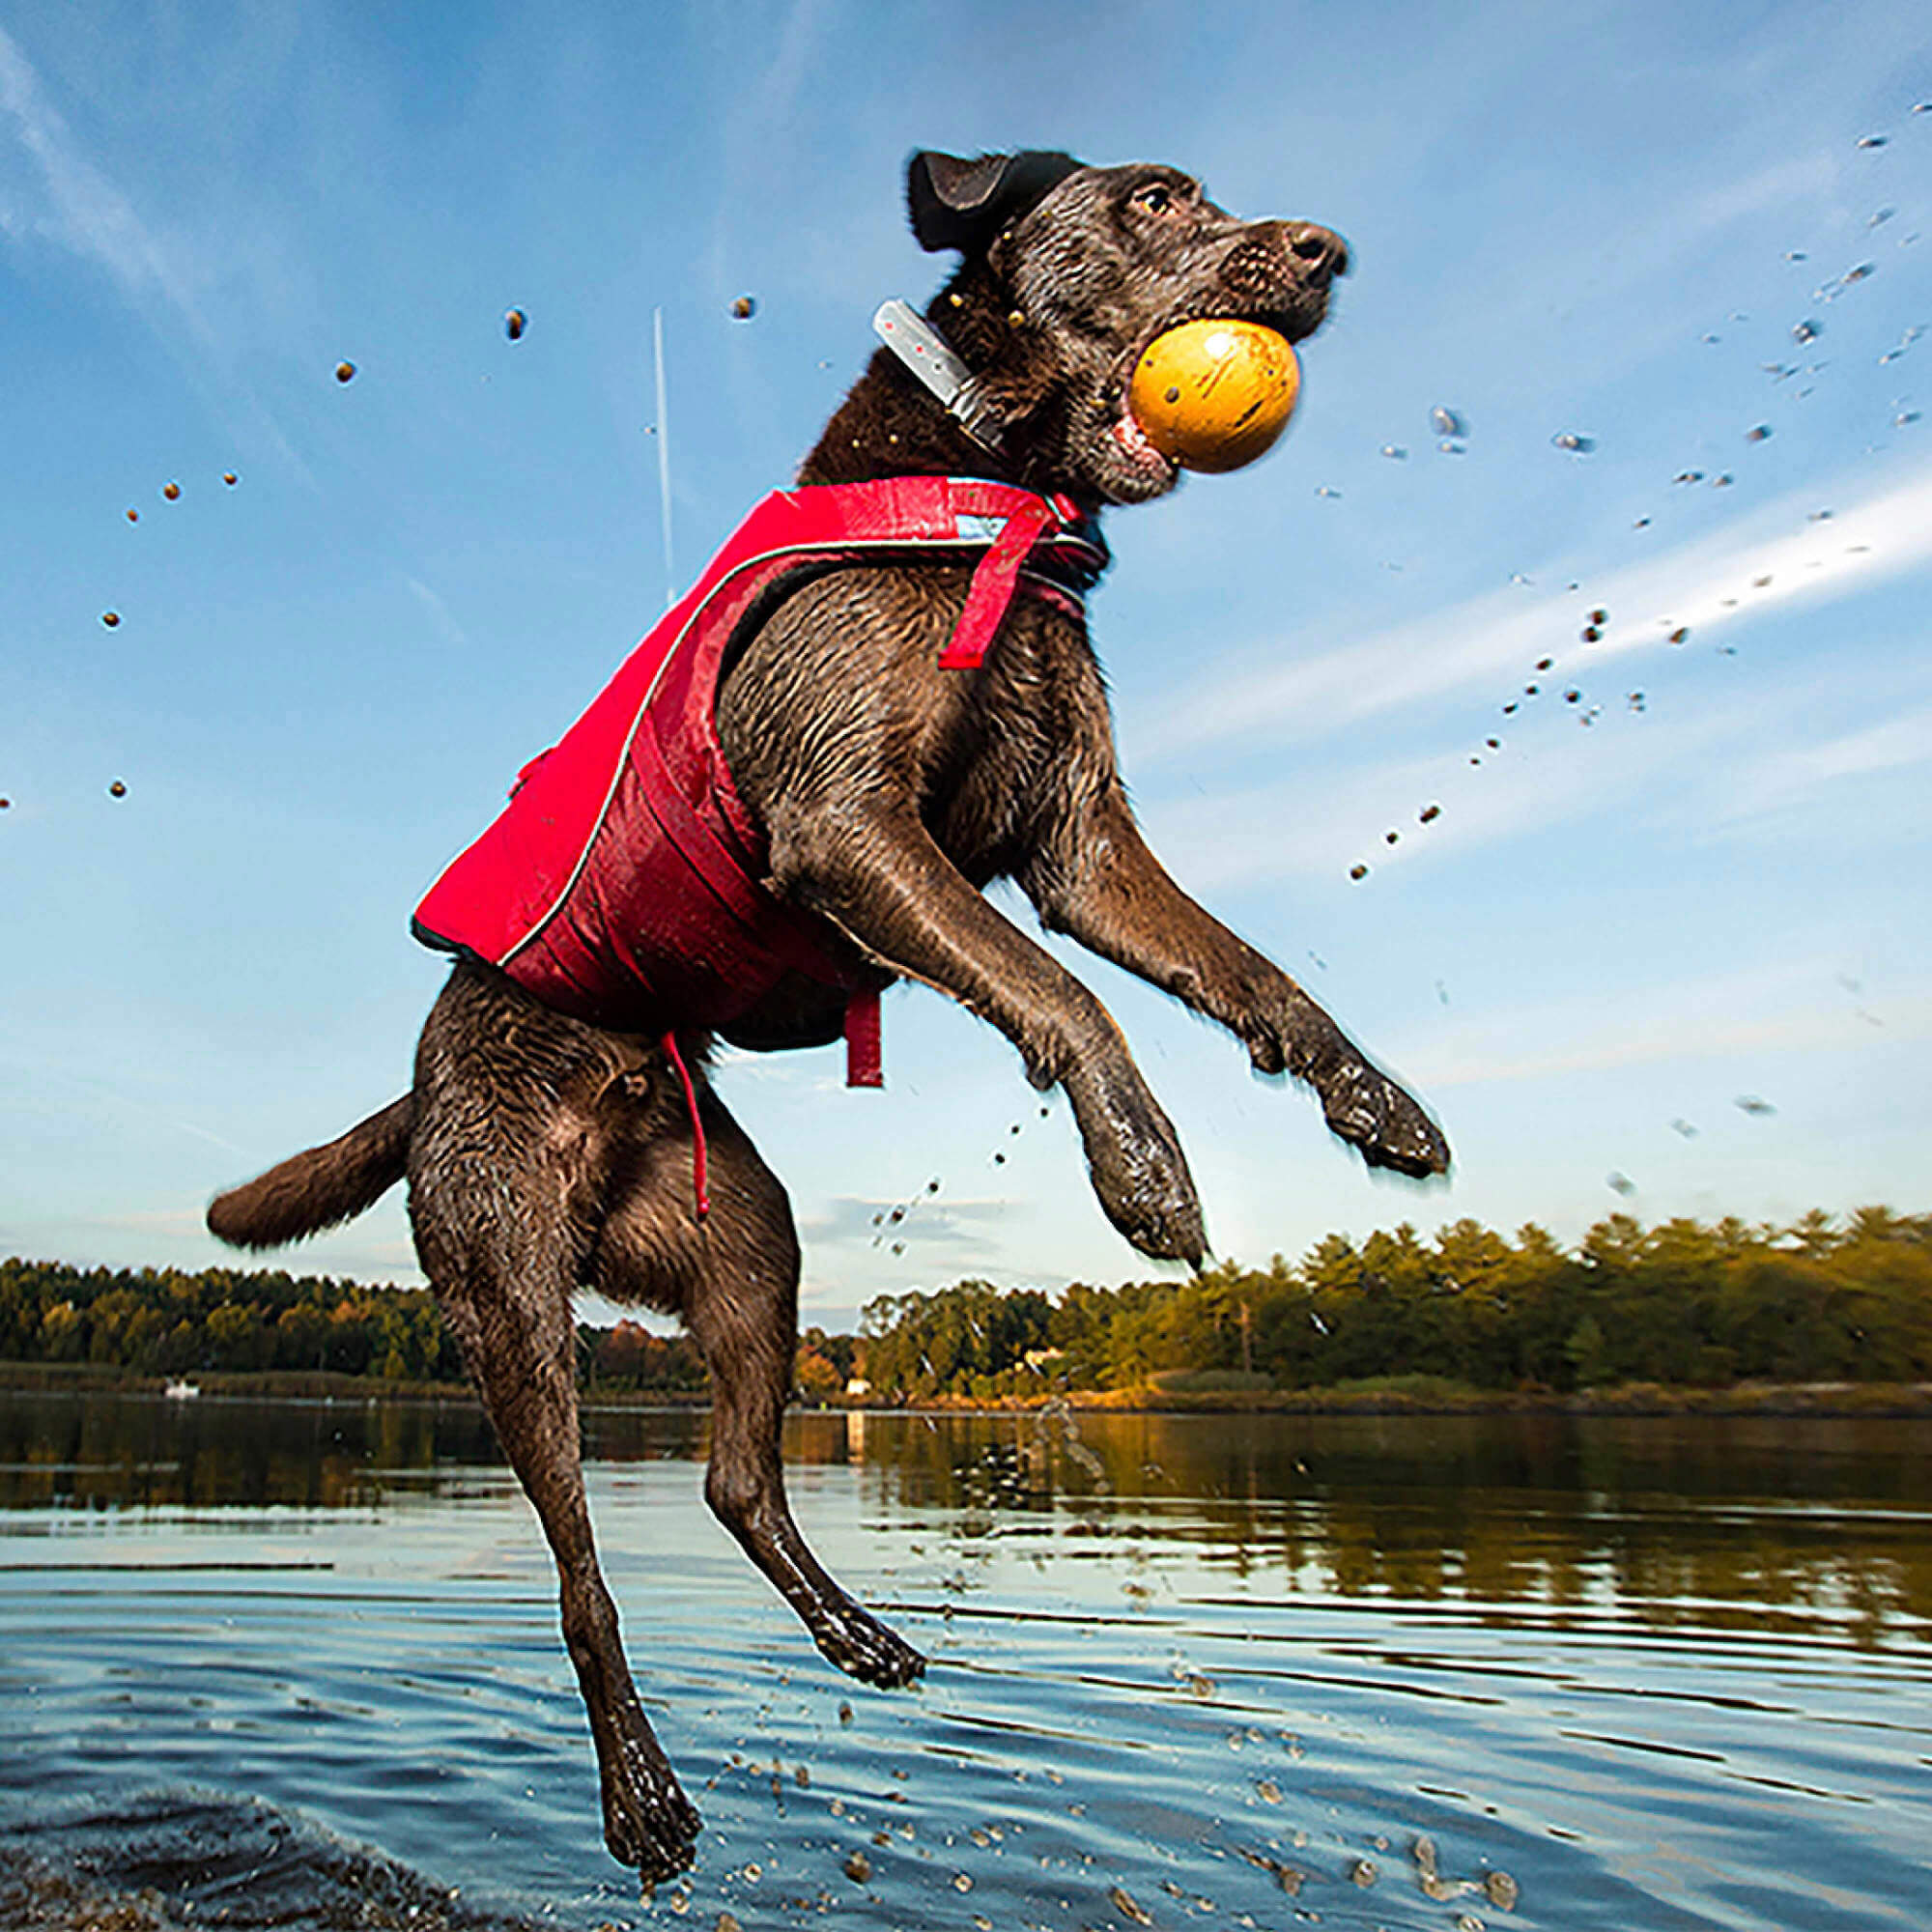 Dog catching a ball outfit in kurgo surf n turf dog life jacket